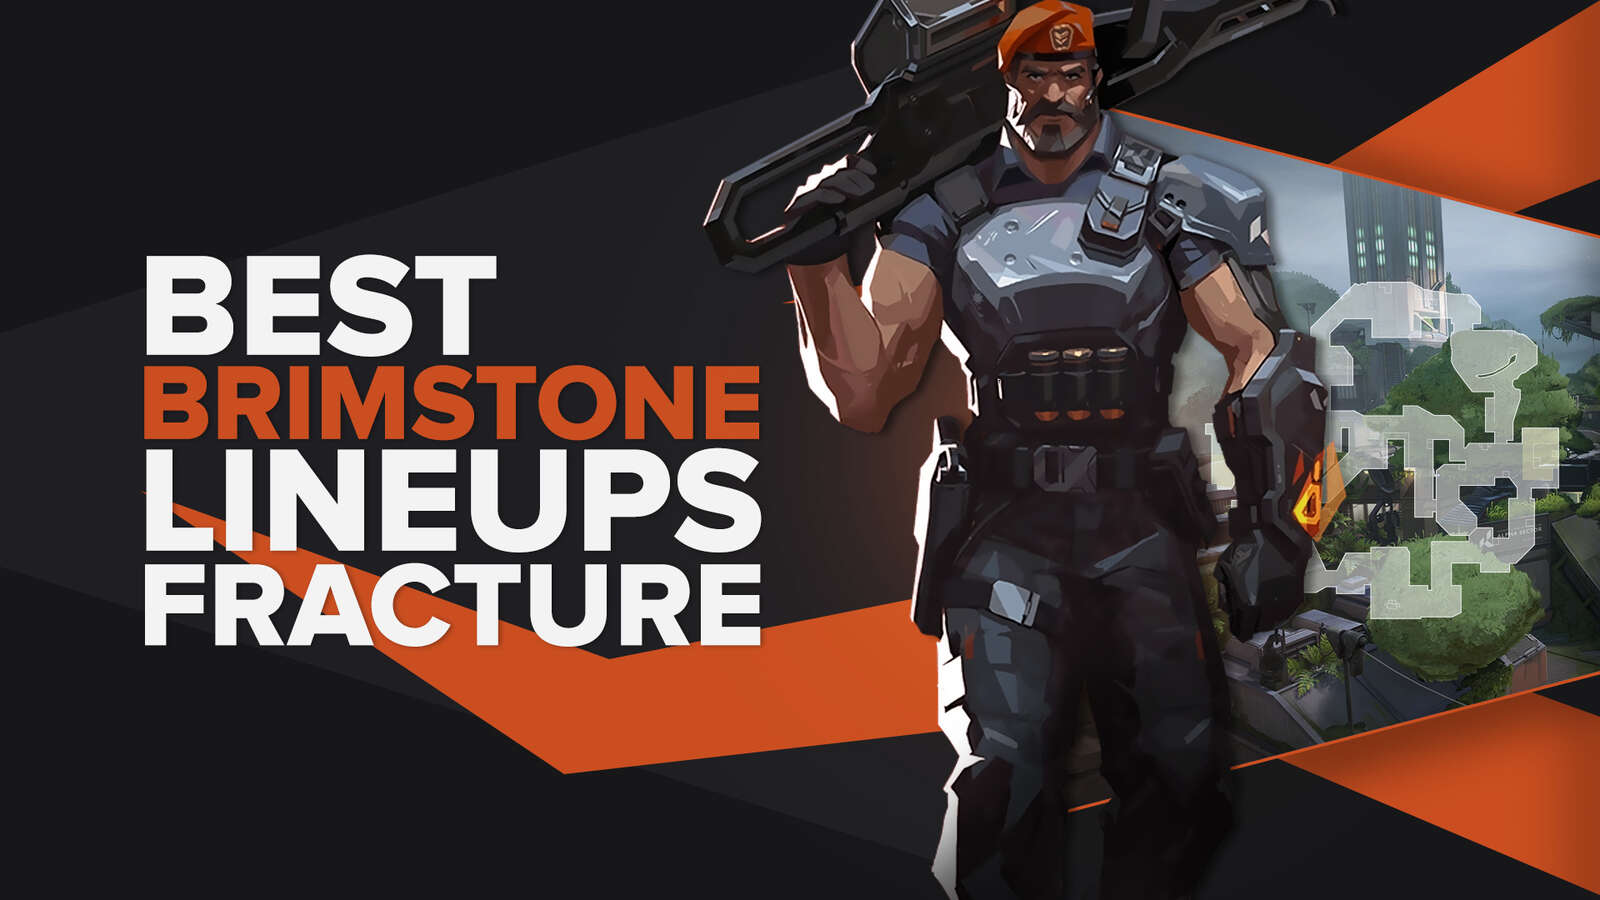 Best Brimstone Lineups on Fracture | Molly